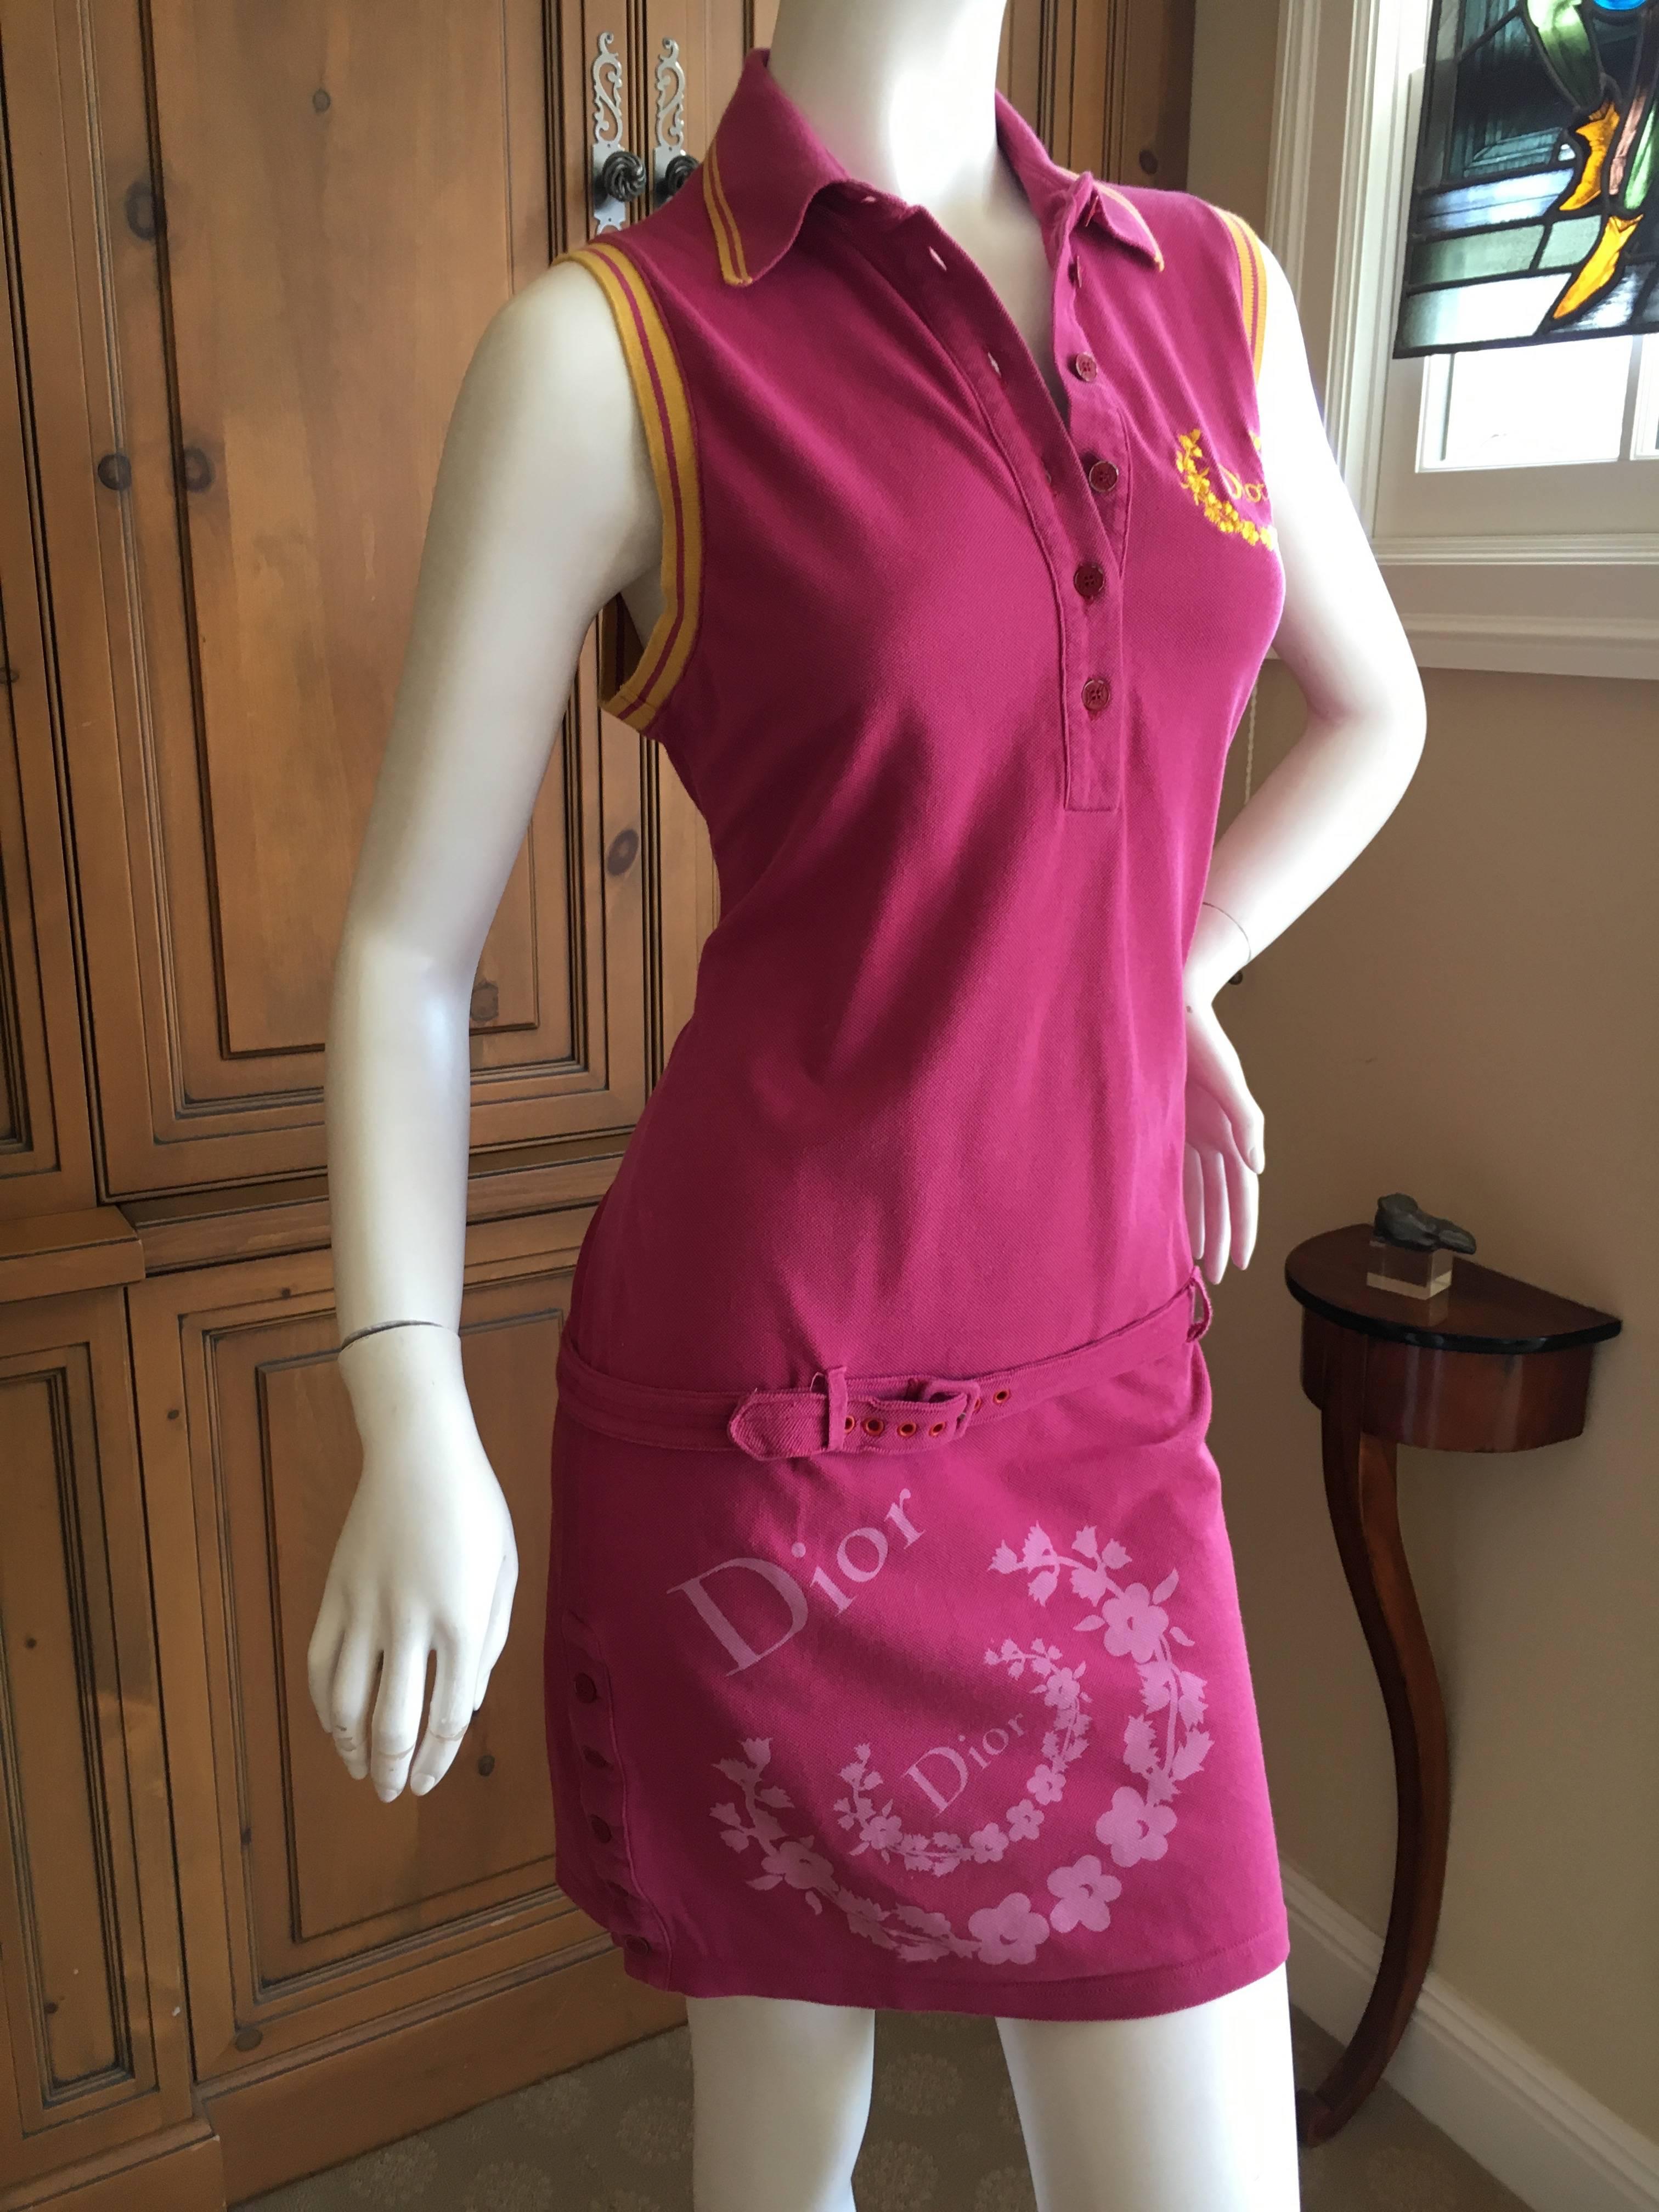 Christian Dior by Galliano Cotton Sleeveless Polo Dress For Sale 2